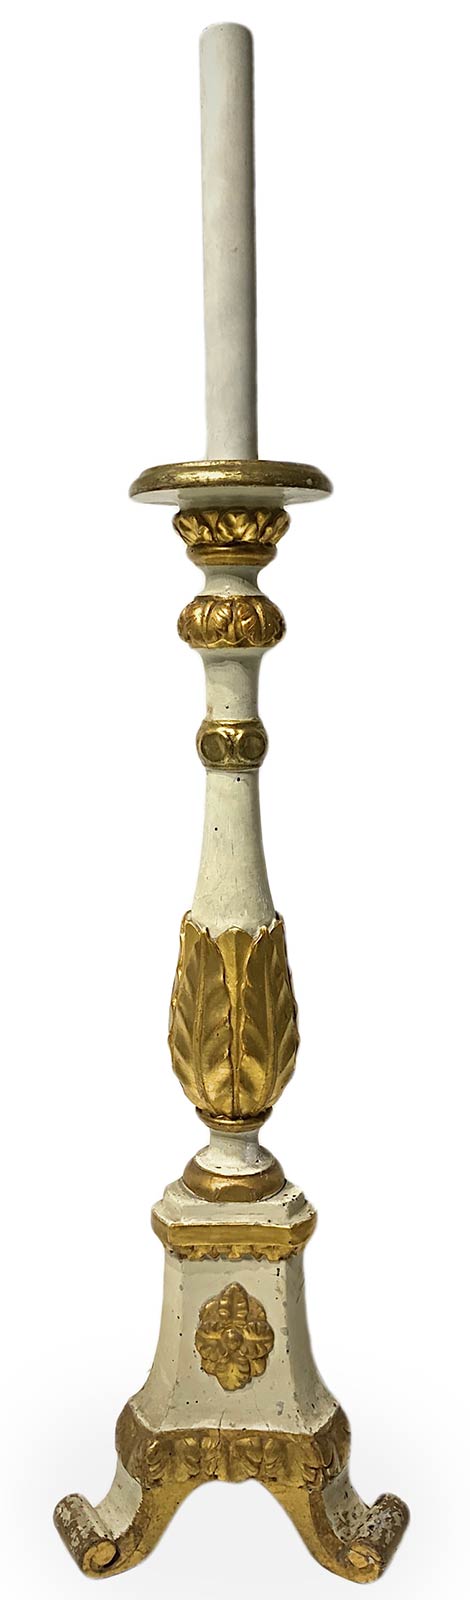 Candlestick lacquered and gilded, 19th century. H 88 cm